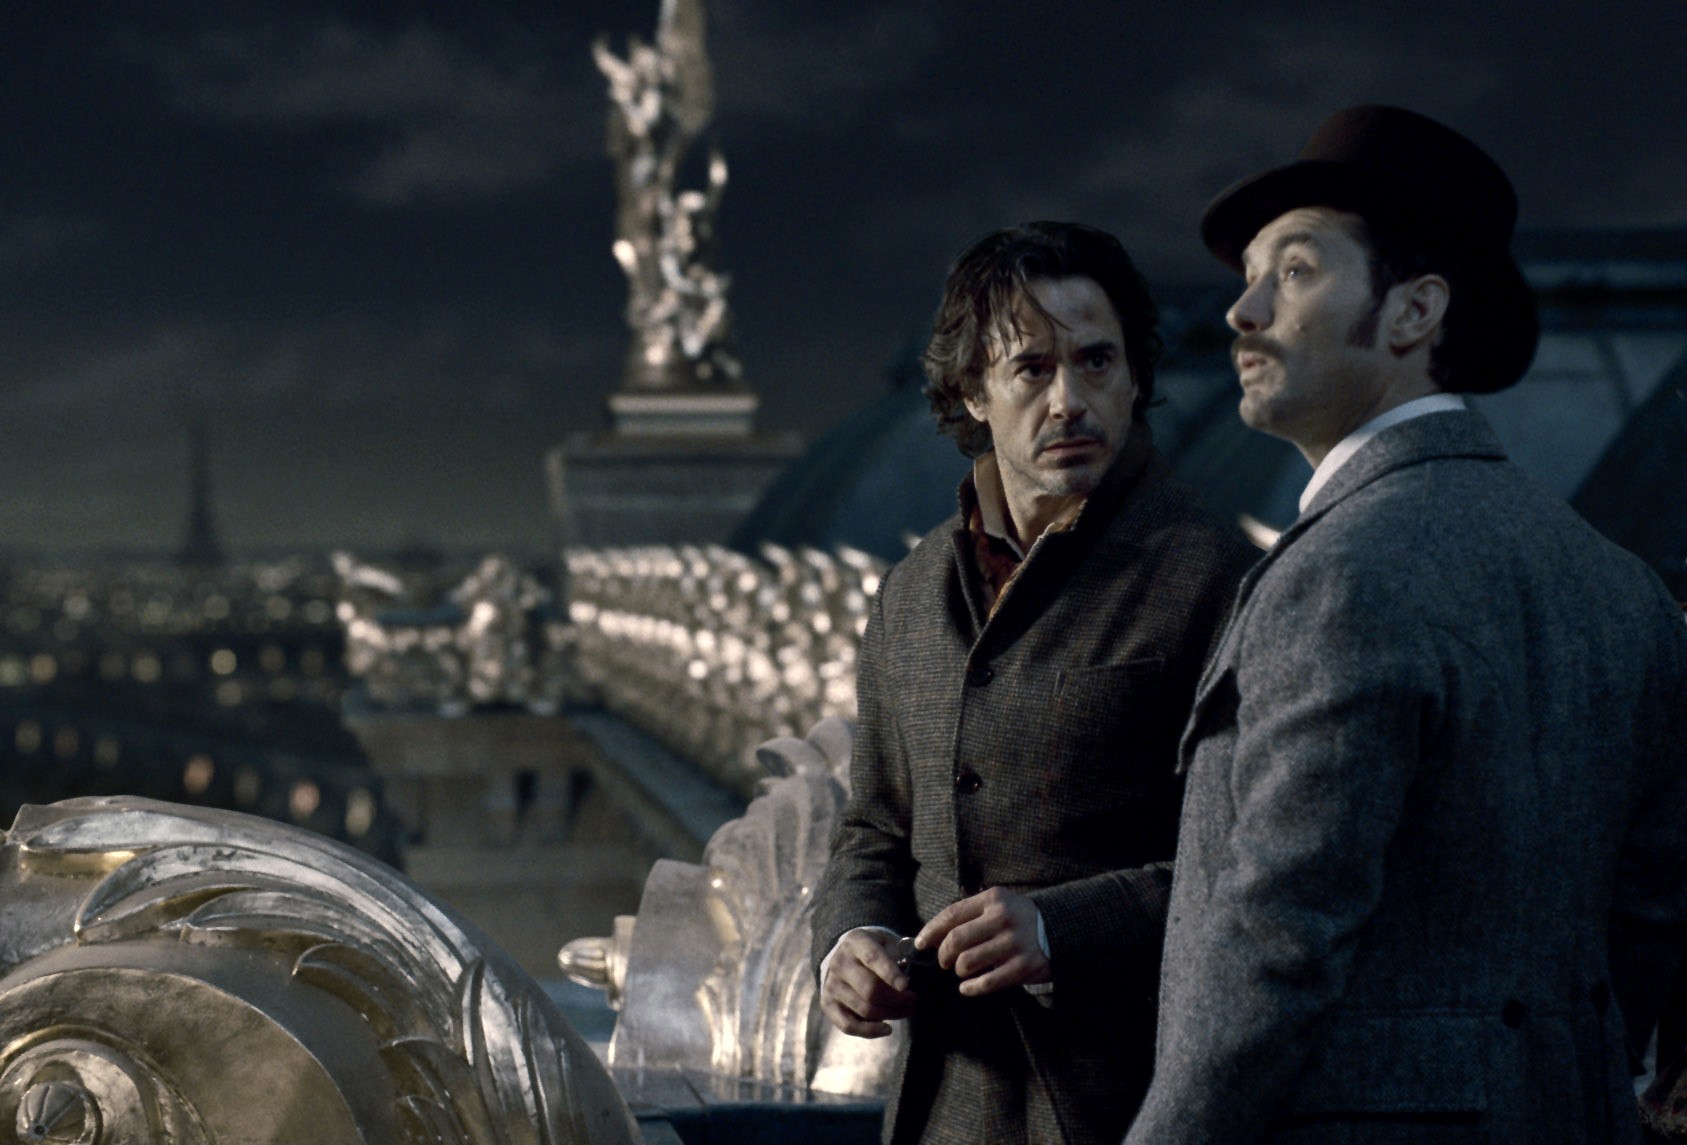 Robert Downey Jr. stars as Sherlock Holmes and Jude Law stars as Dr. John Watson in Warner Bros. Pictures' Sherlock Holmes: A Game of Shadows (2011)